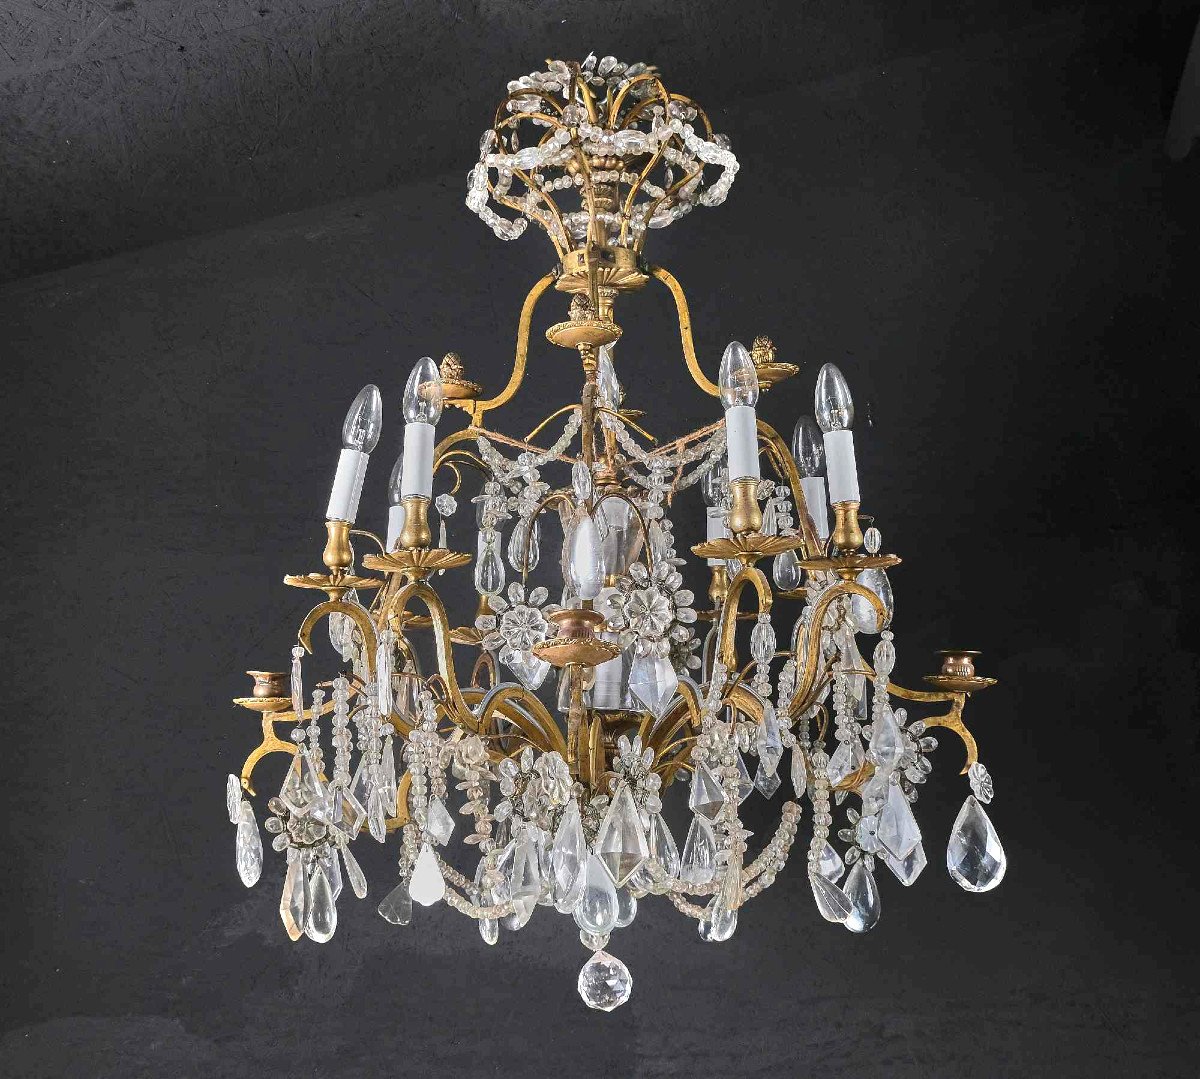 Very Beautiful Cage Chandelier In Rock Crystal And Gilt Bronze, Paris 19th